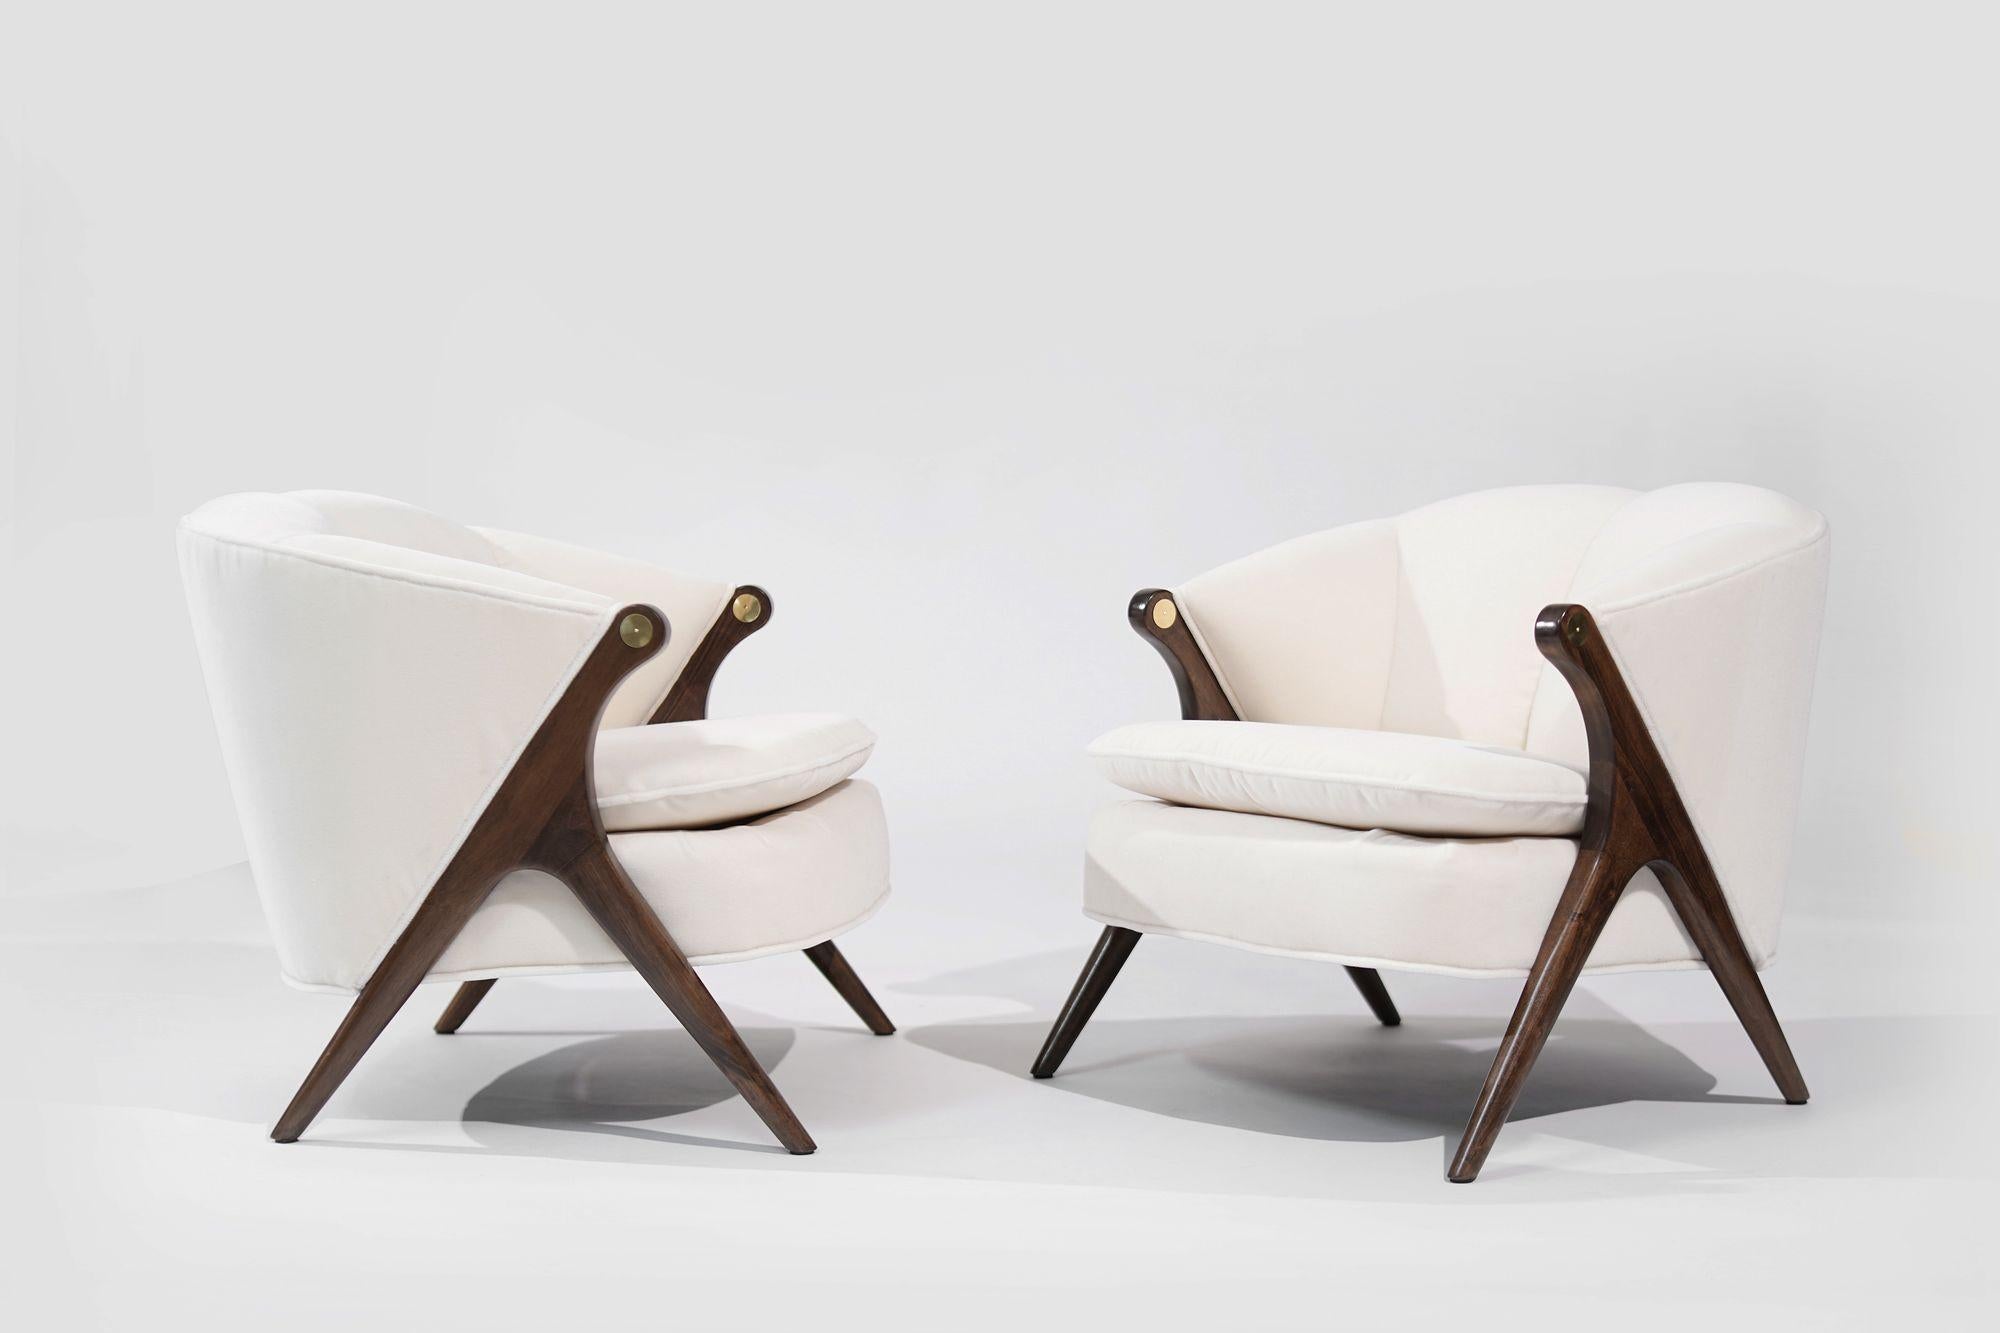 Indulge in the allure of mid-century sophistication with this impeccably restored Set of Lounge Chairs by Karpen of California, circa 1950s, brought back to life by Stamford Modern. Upholstered in luxurious off-white mohair from Holly Hunt, the